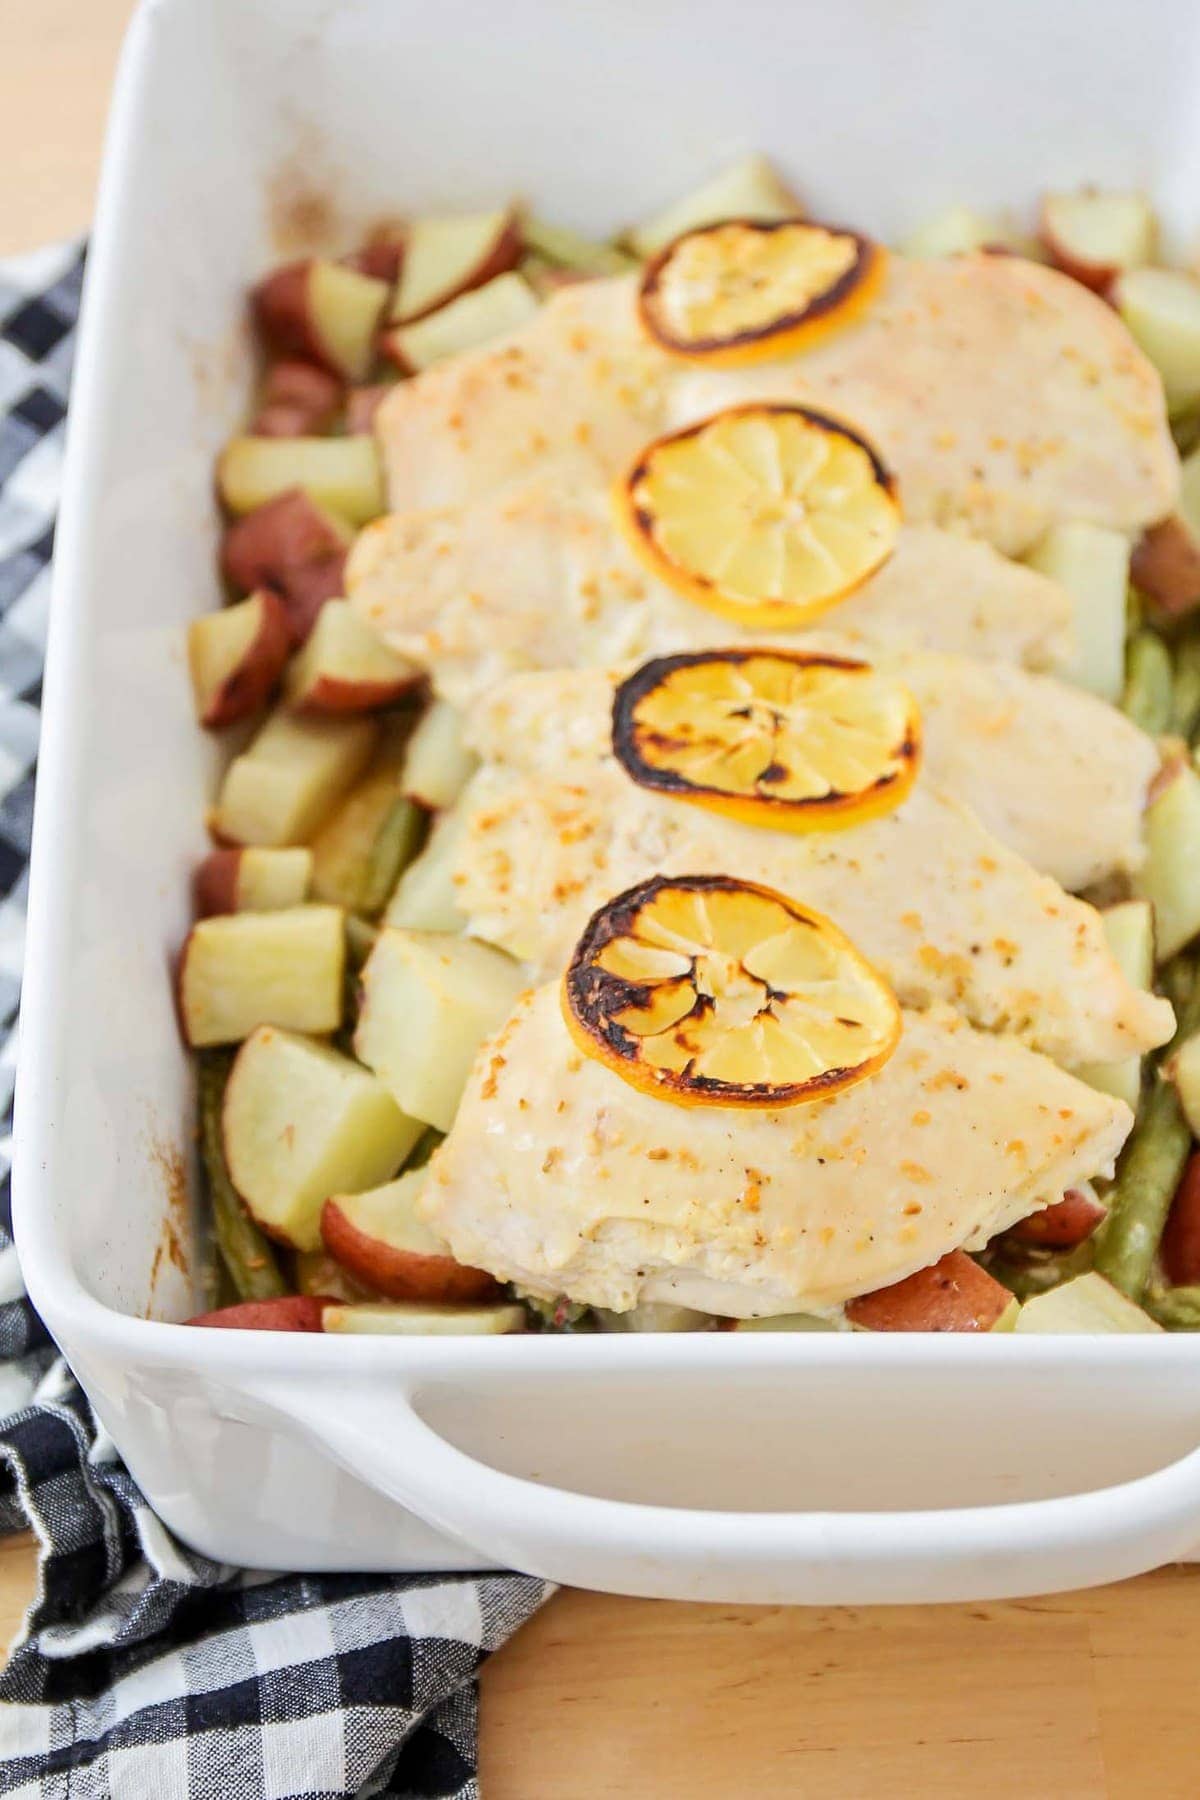 Healthy Dinner Ideas - Lemon Chicken With Vegetables topped with lemon slices in a white baking dish.